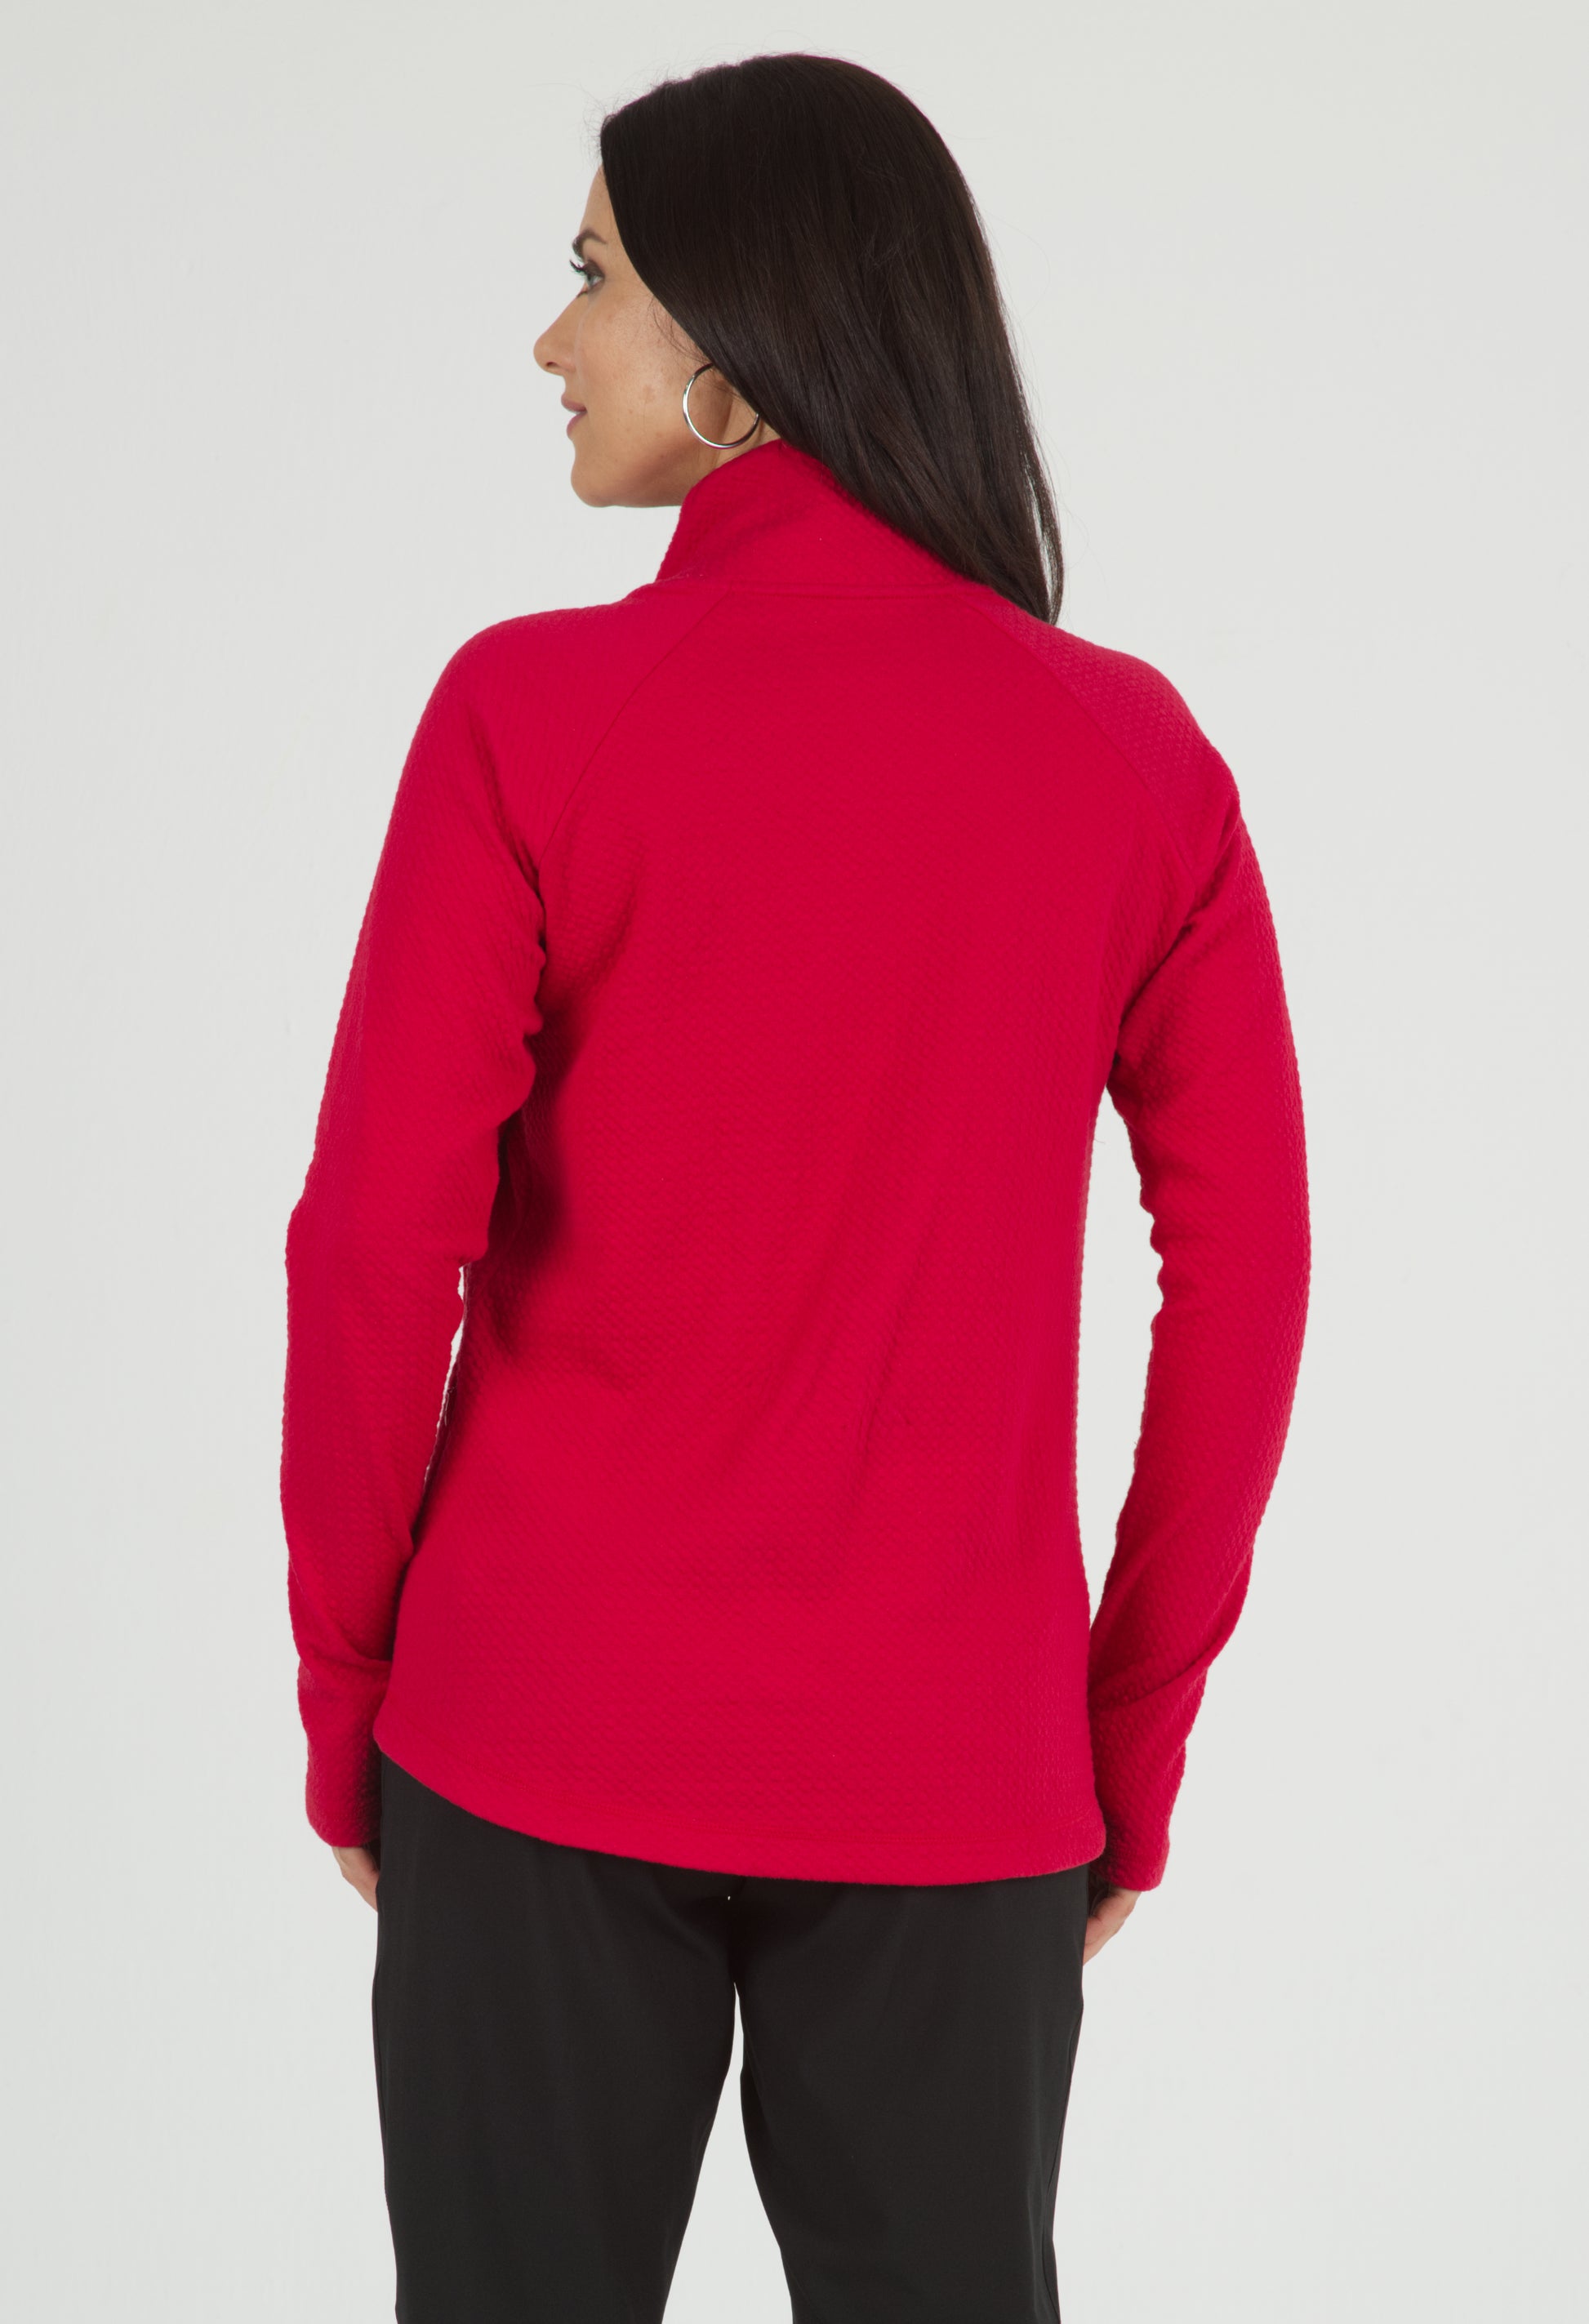 IBKÜL - Solid Popcorn Stitch Asymmetrical Zip Pullover - 64000 - Color: Red